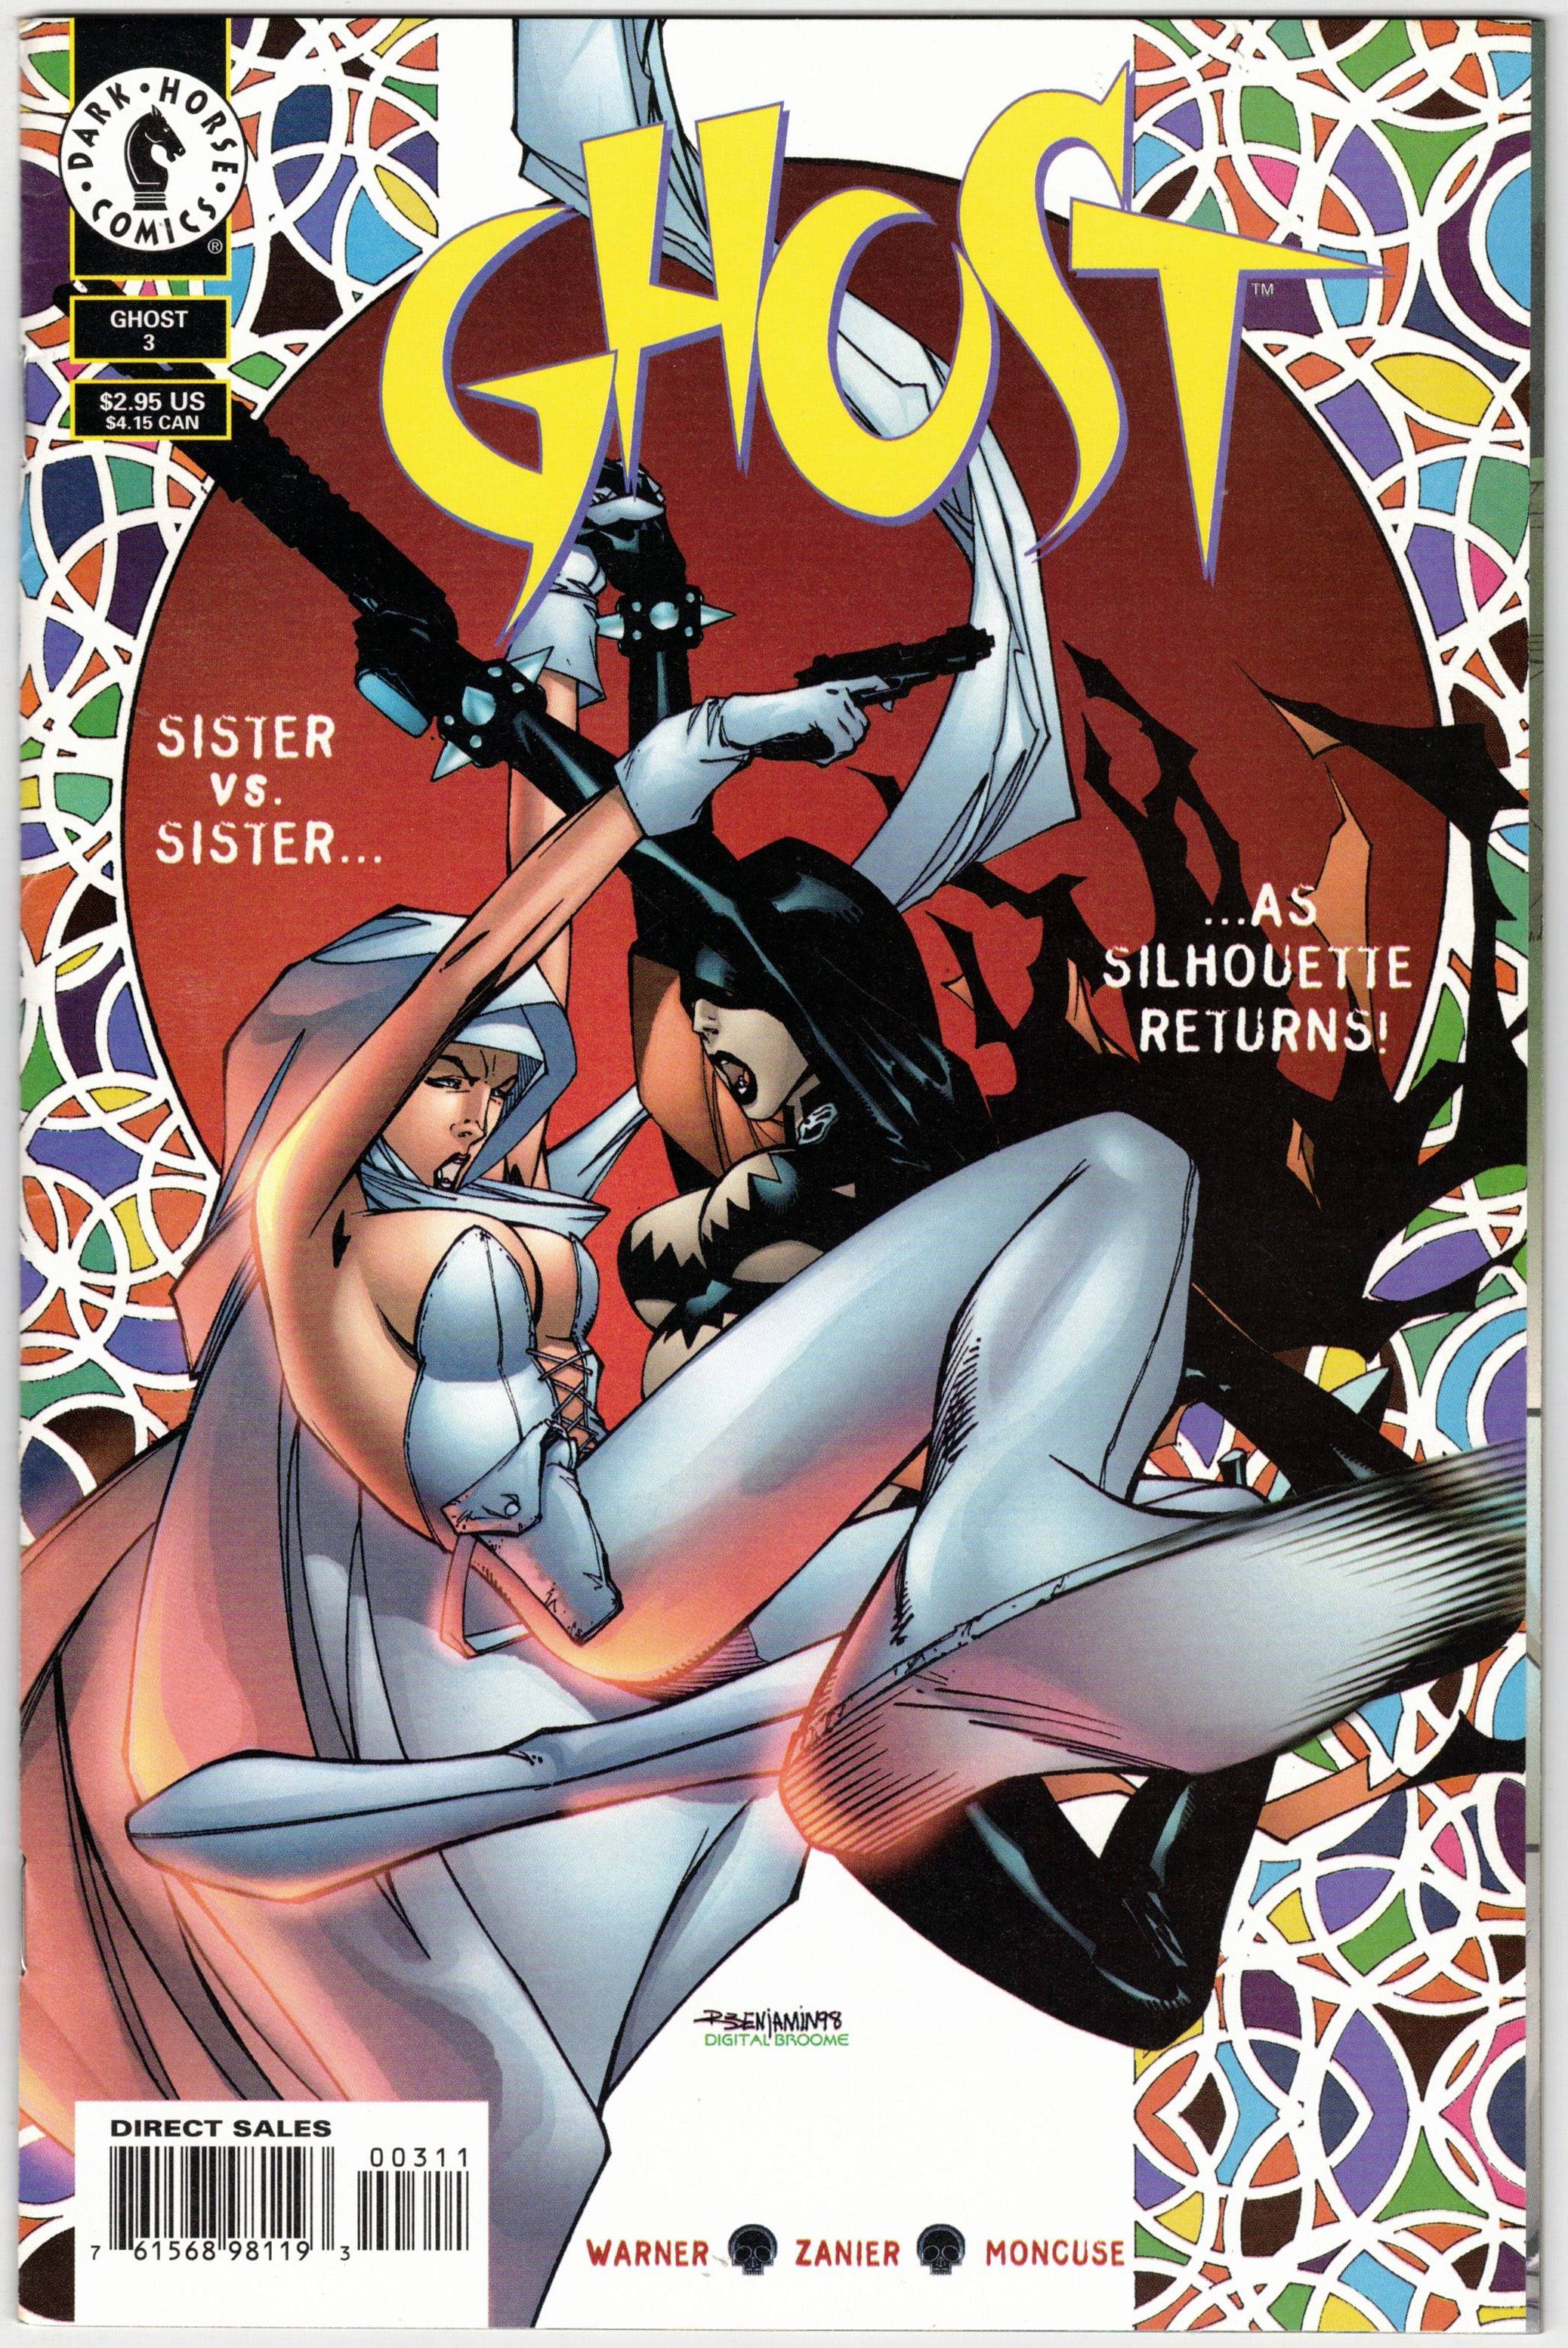 Photo of Ghost, Vol. 2 (1998) Issue 3 - Comic sold by Stronghold Collectibles